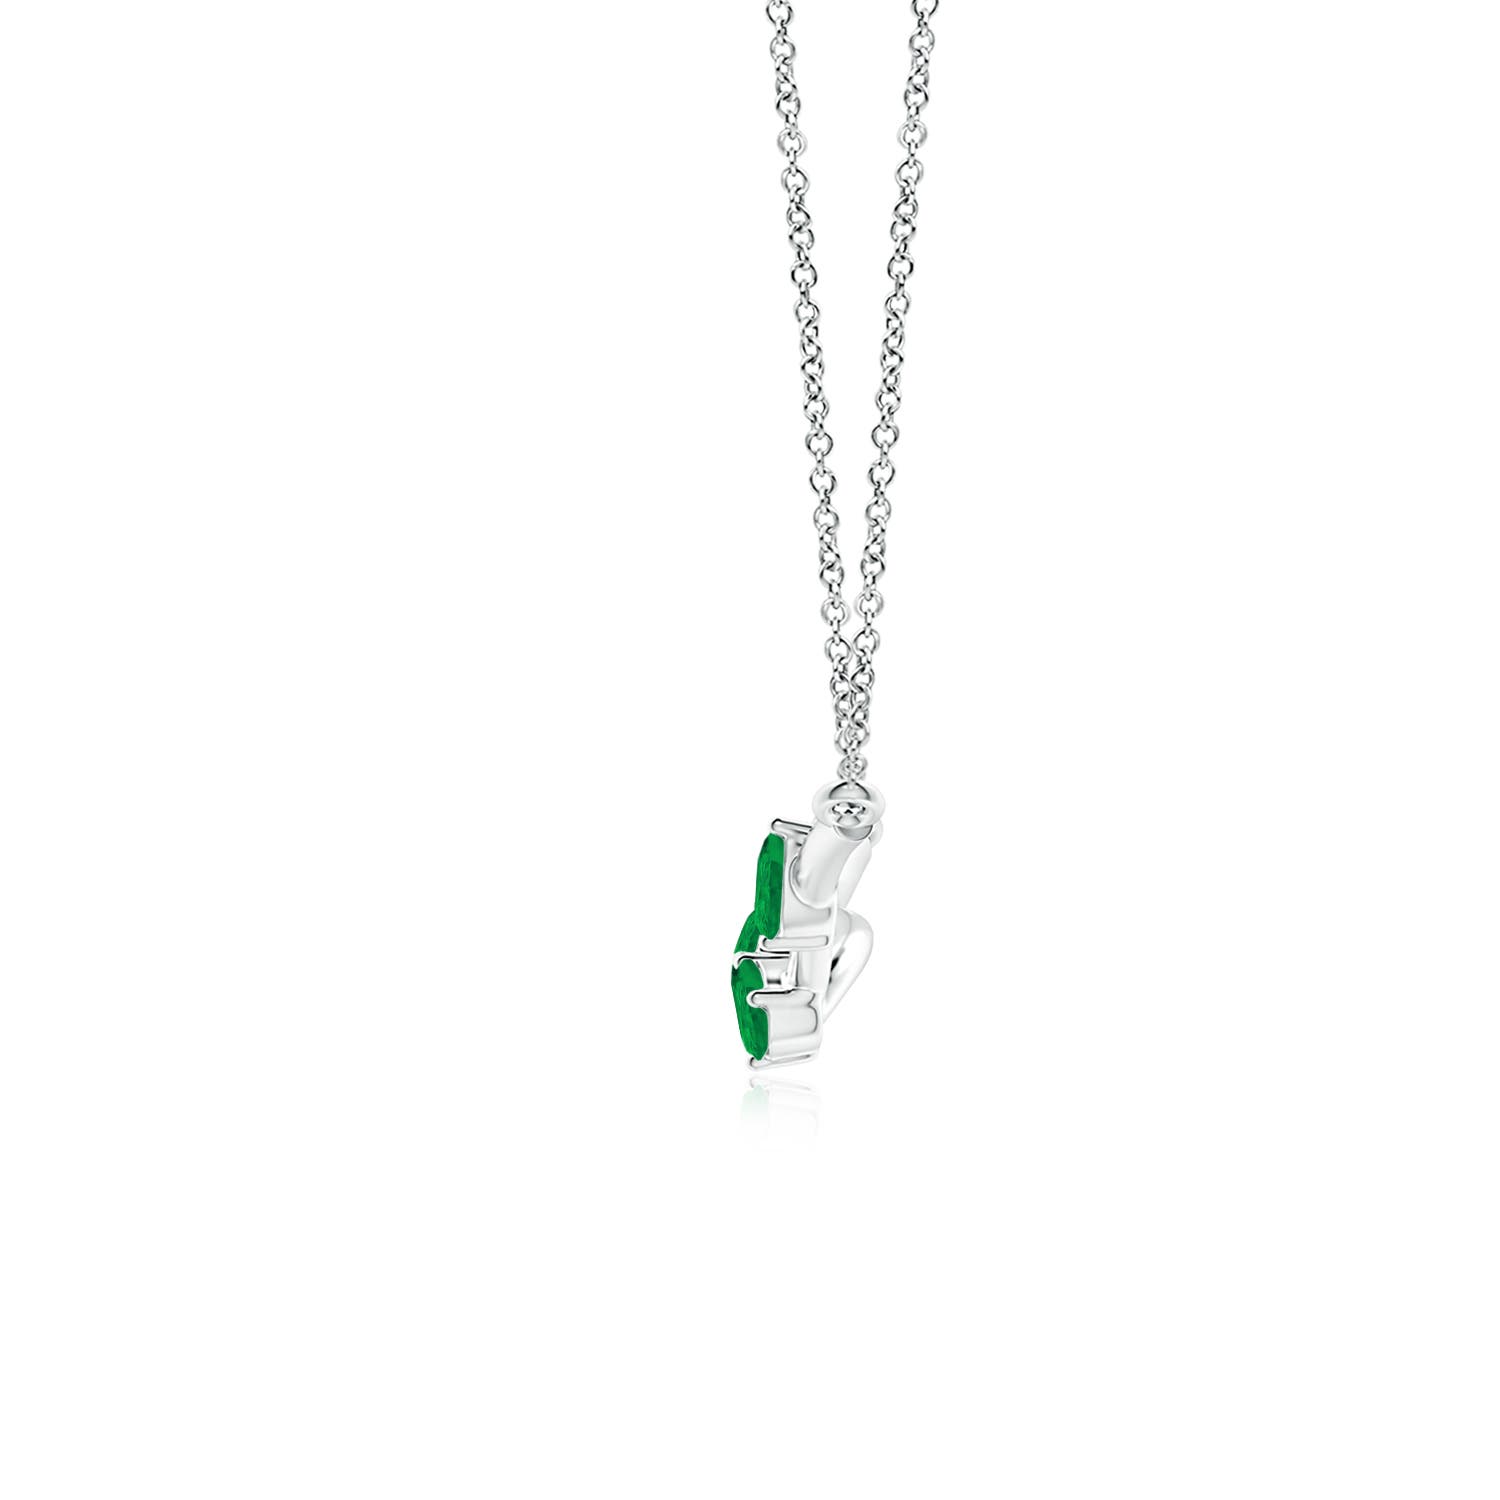 AA - Emerald / 0.6 CT / 14 KT White Gold